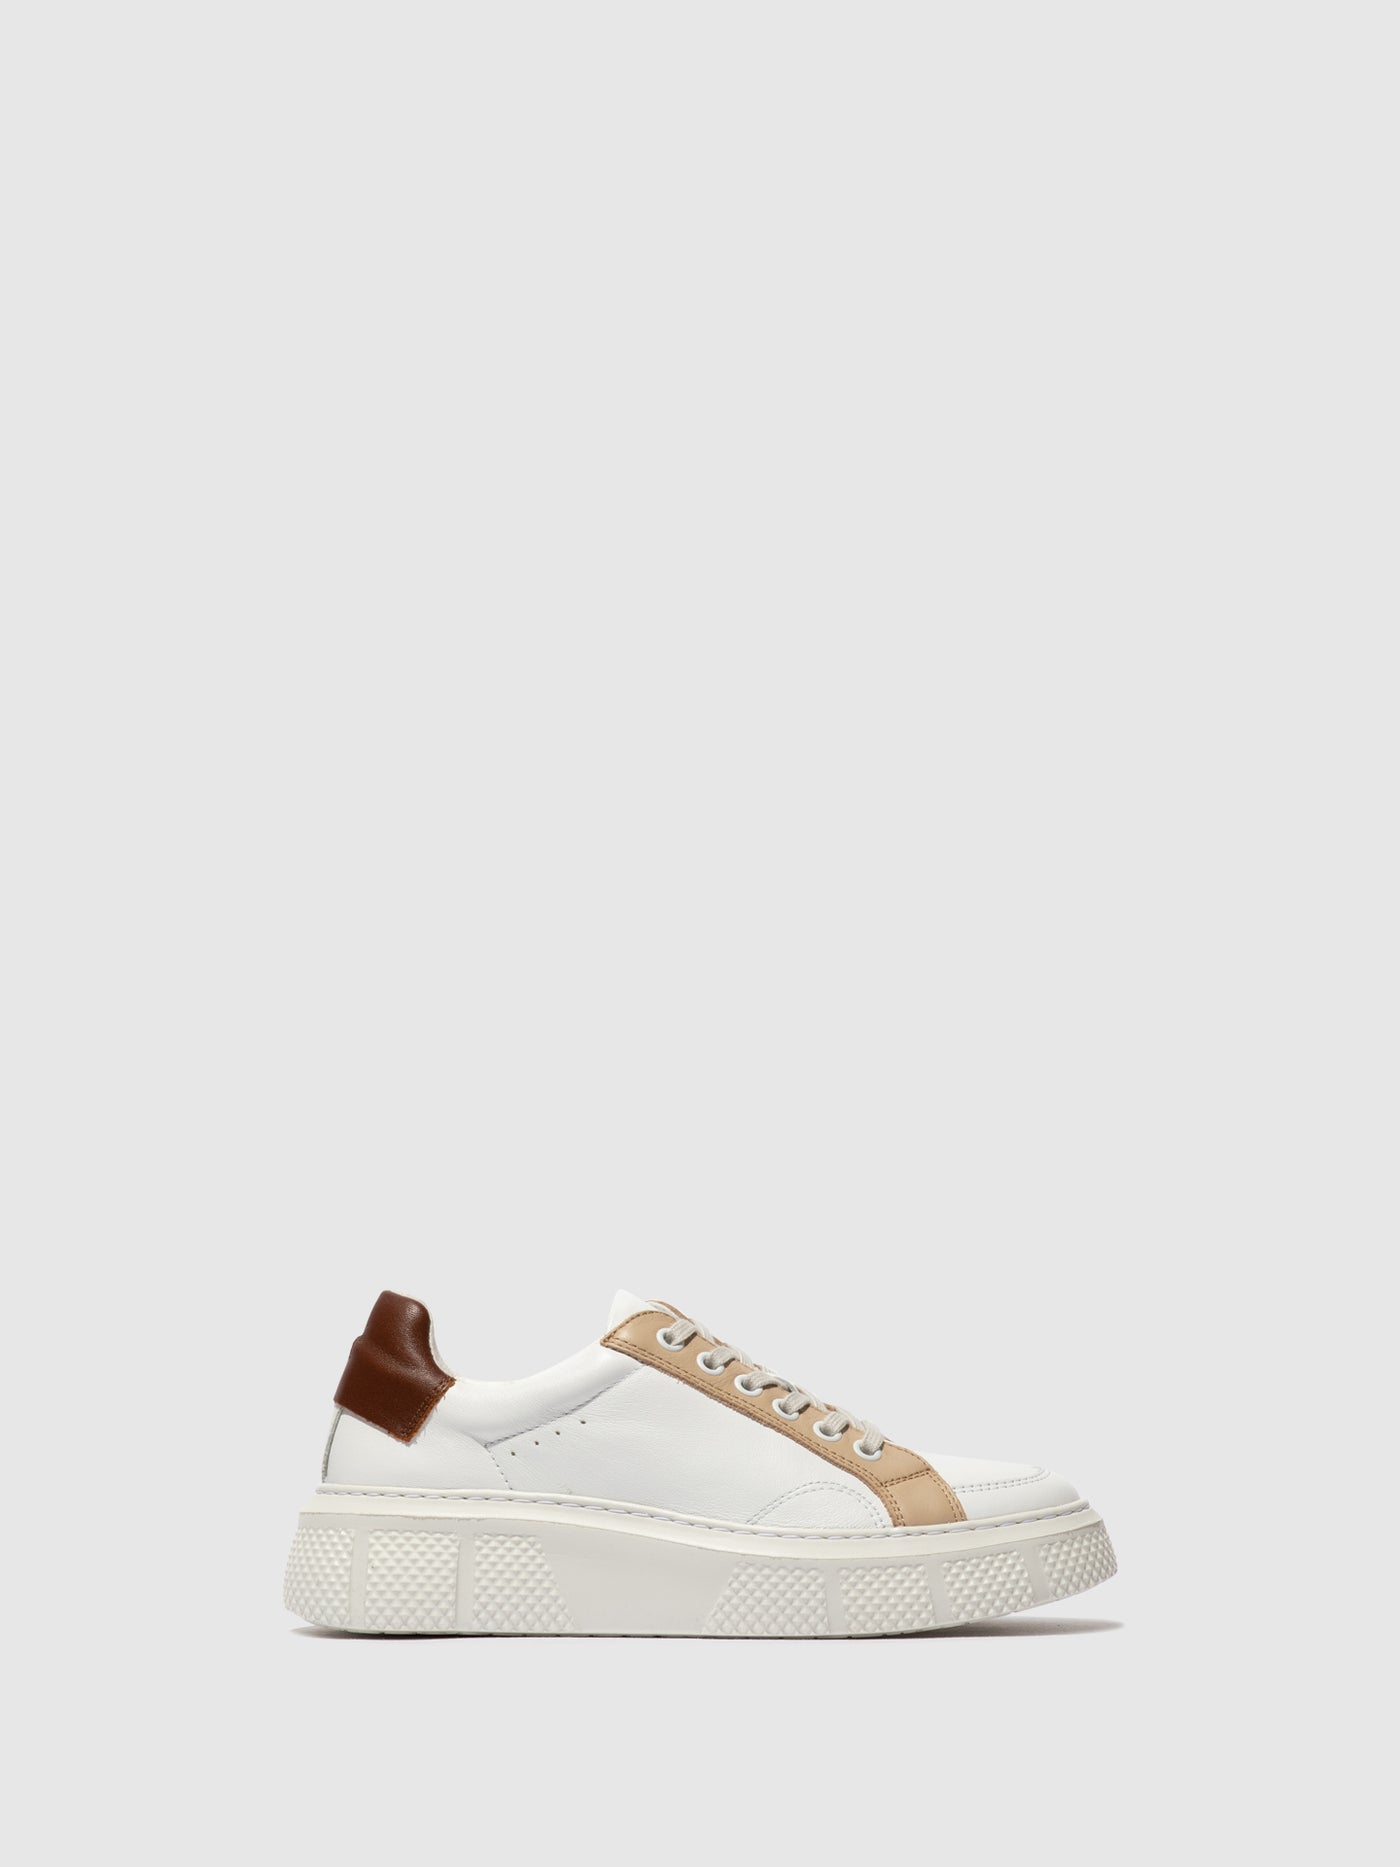 Lace-up Trainers EMMY510FLY WHITE/BEIGE/COGNAC